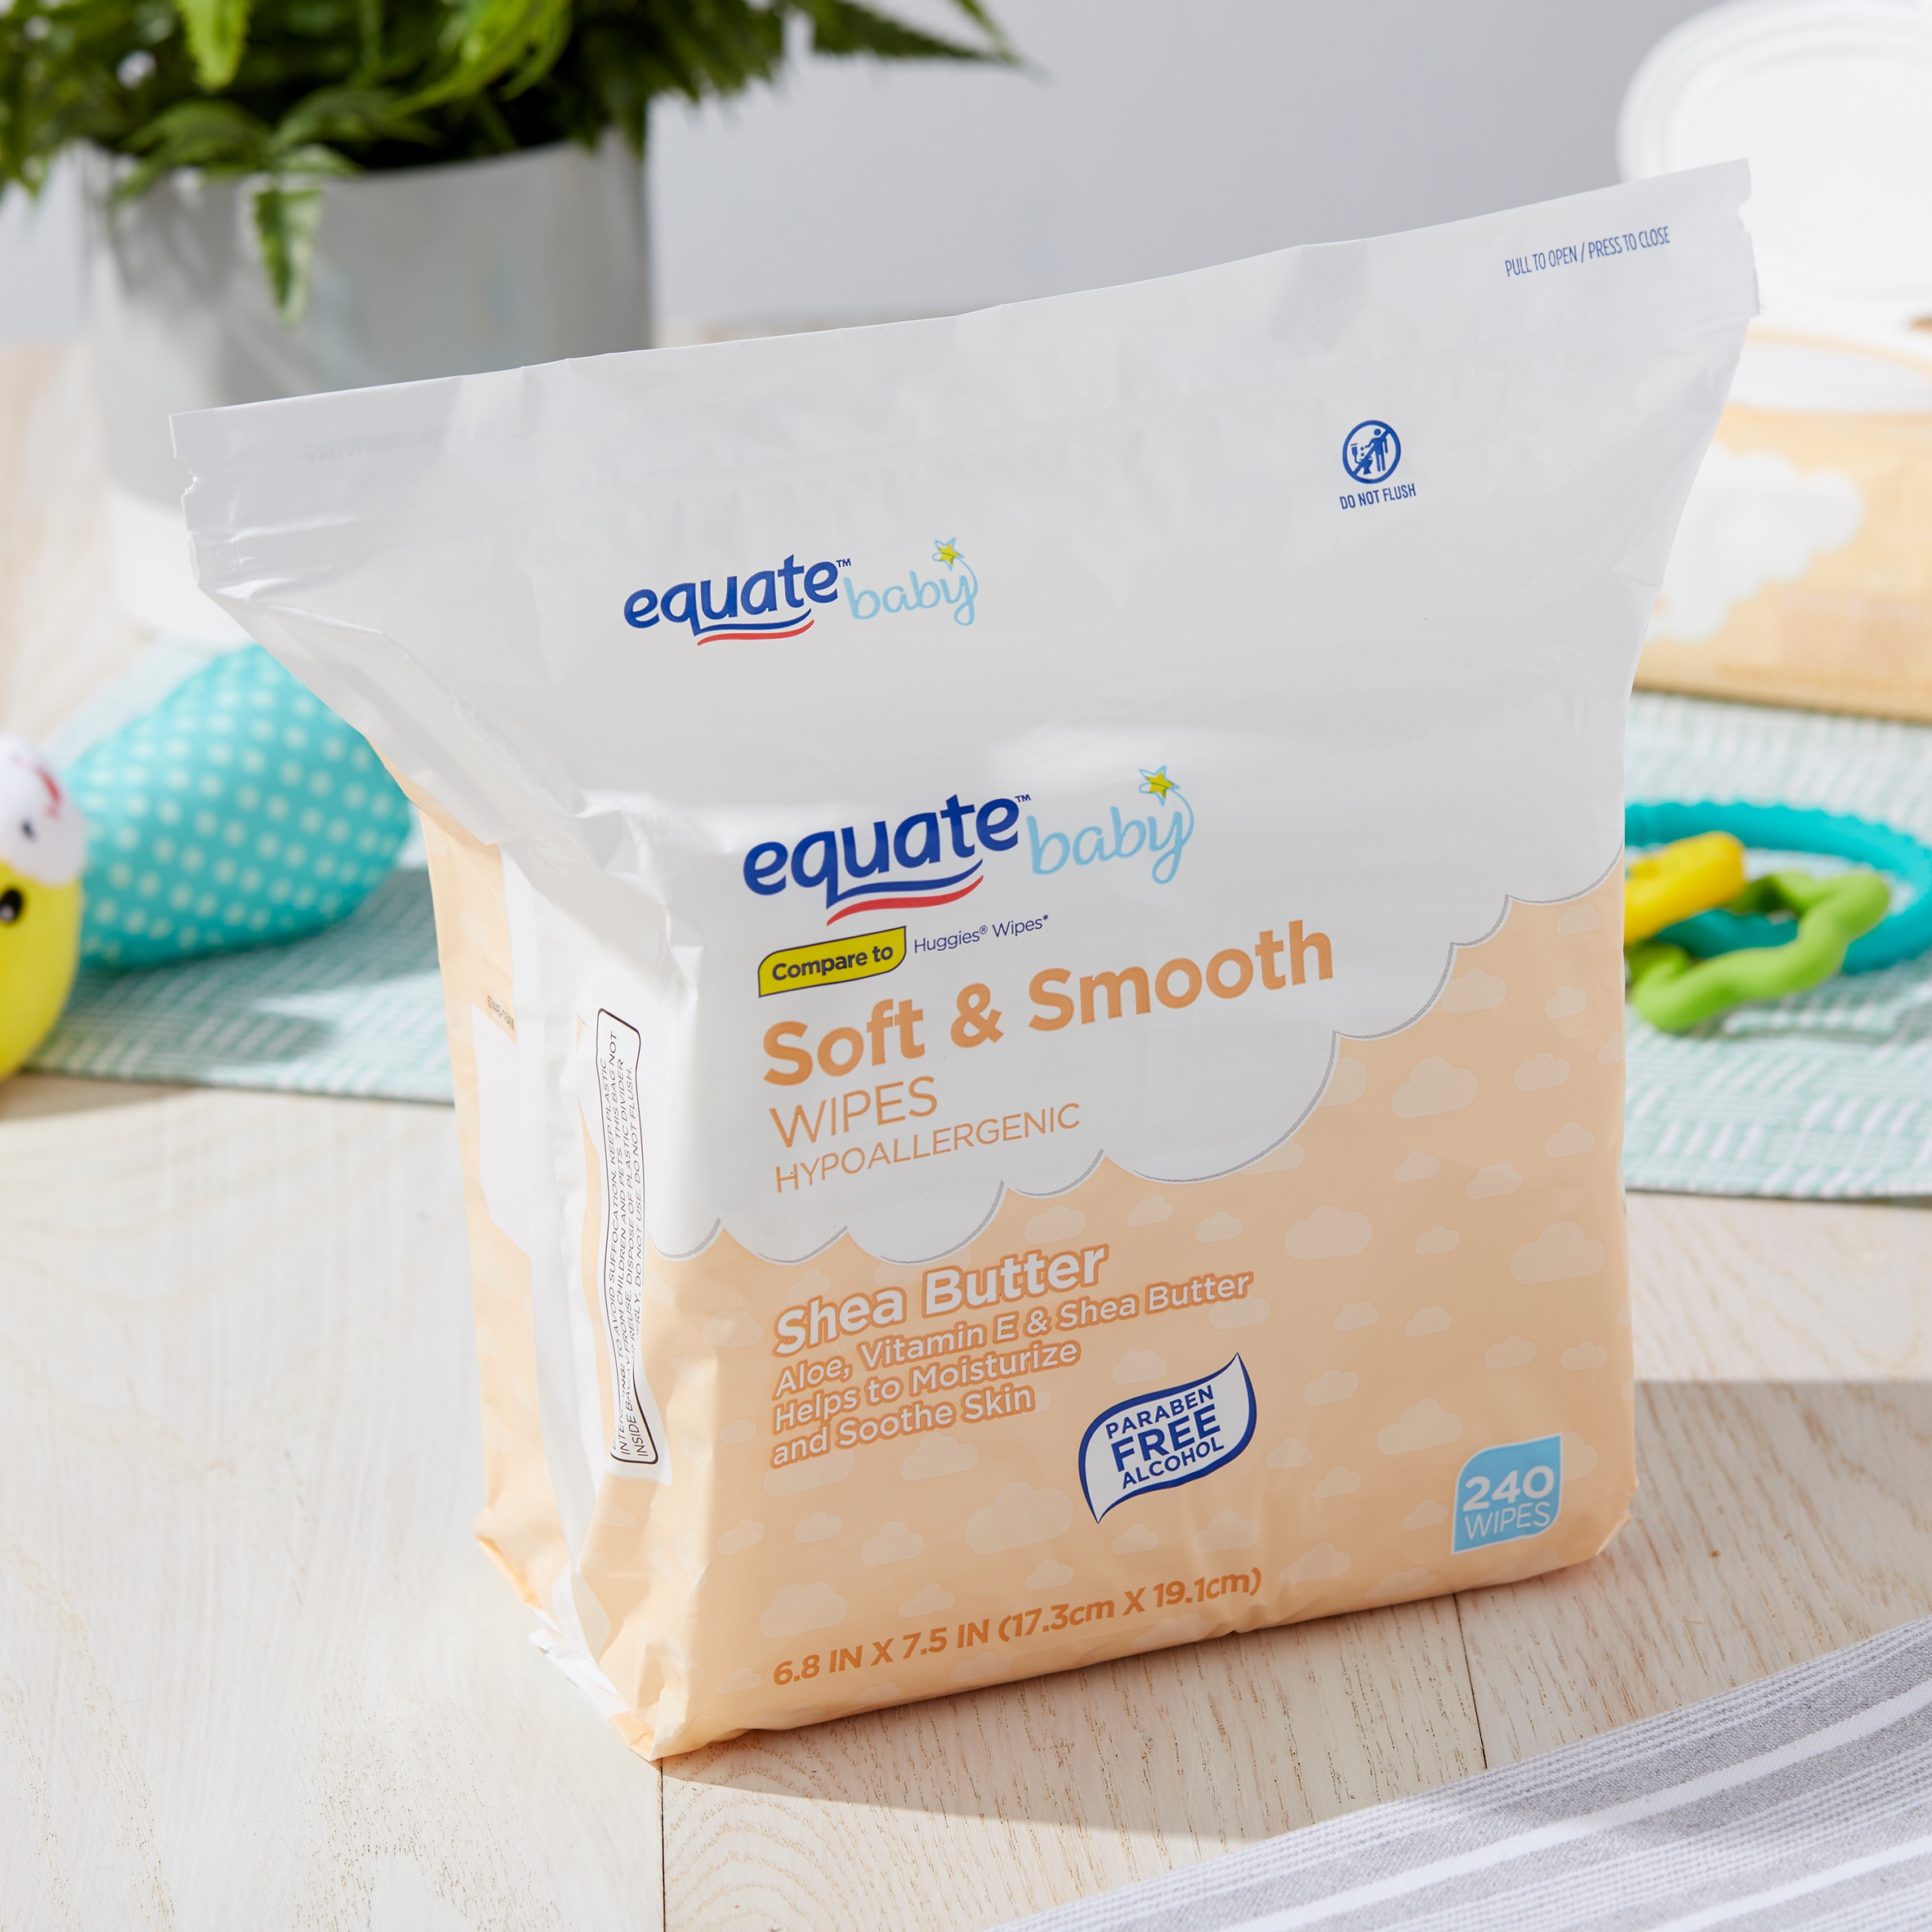 Equate Baby Soft & Smooth Shea Butter Wipes, 240 Count - image 2 of 10